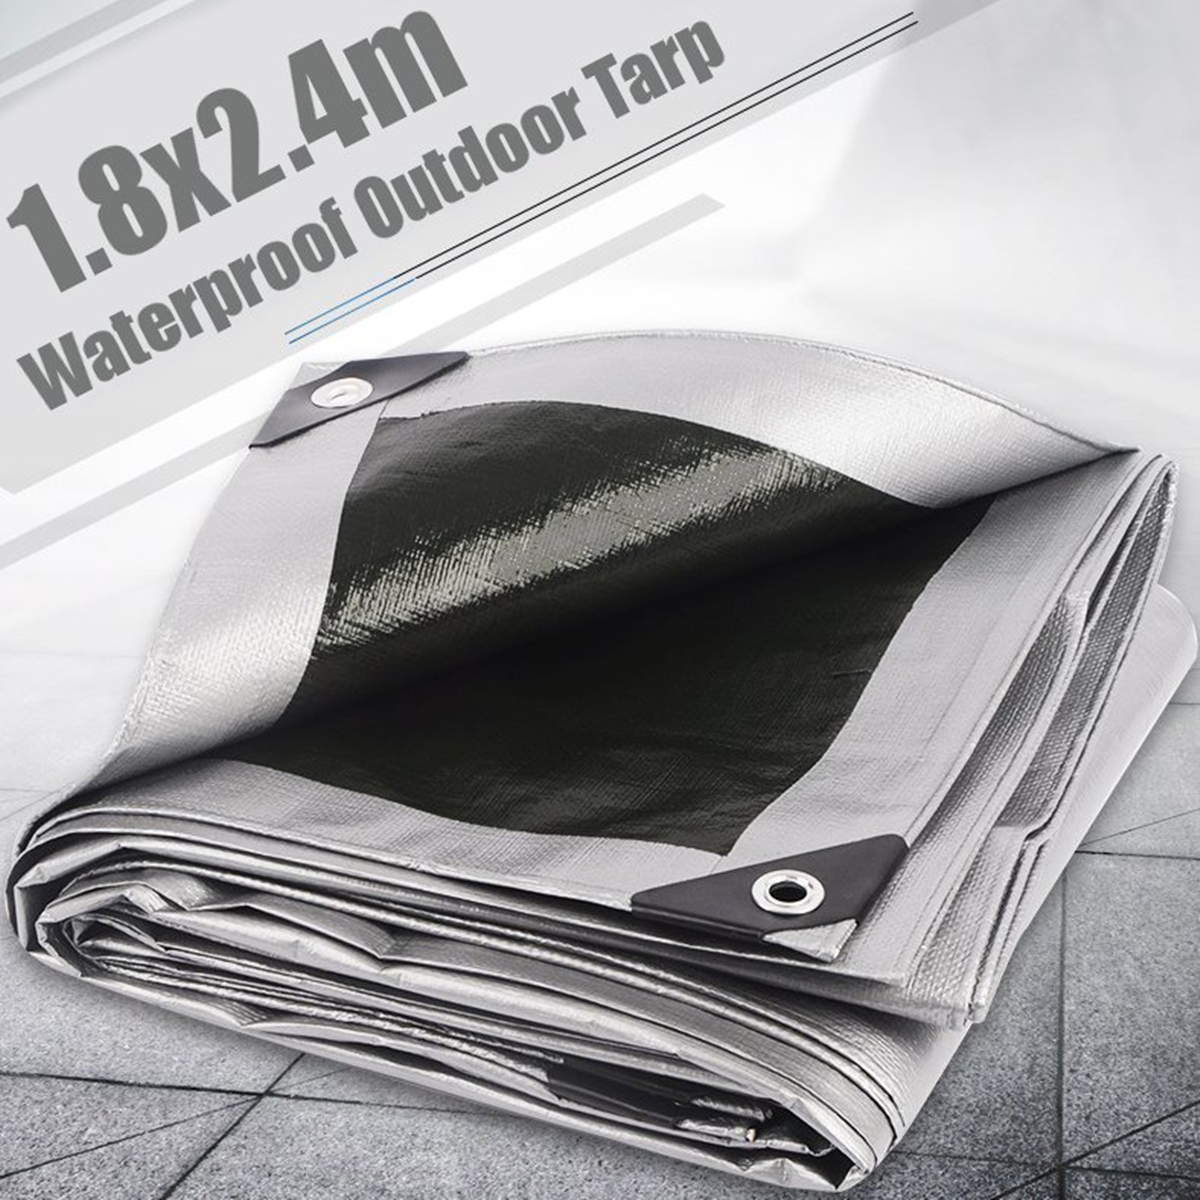 18x24m-Waterproof-Camping-Tarp-Ground-Sheet-Outdoor-Garden-Cover-with-Eyelets-1626783-2